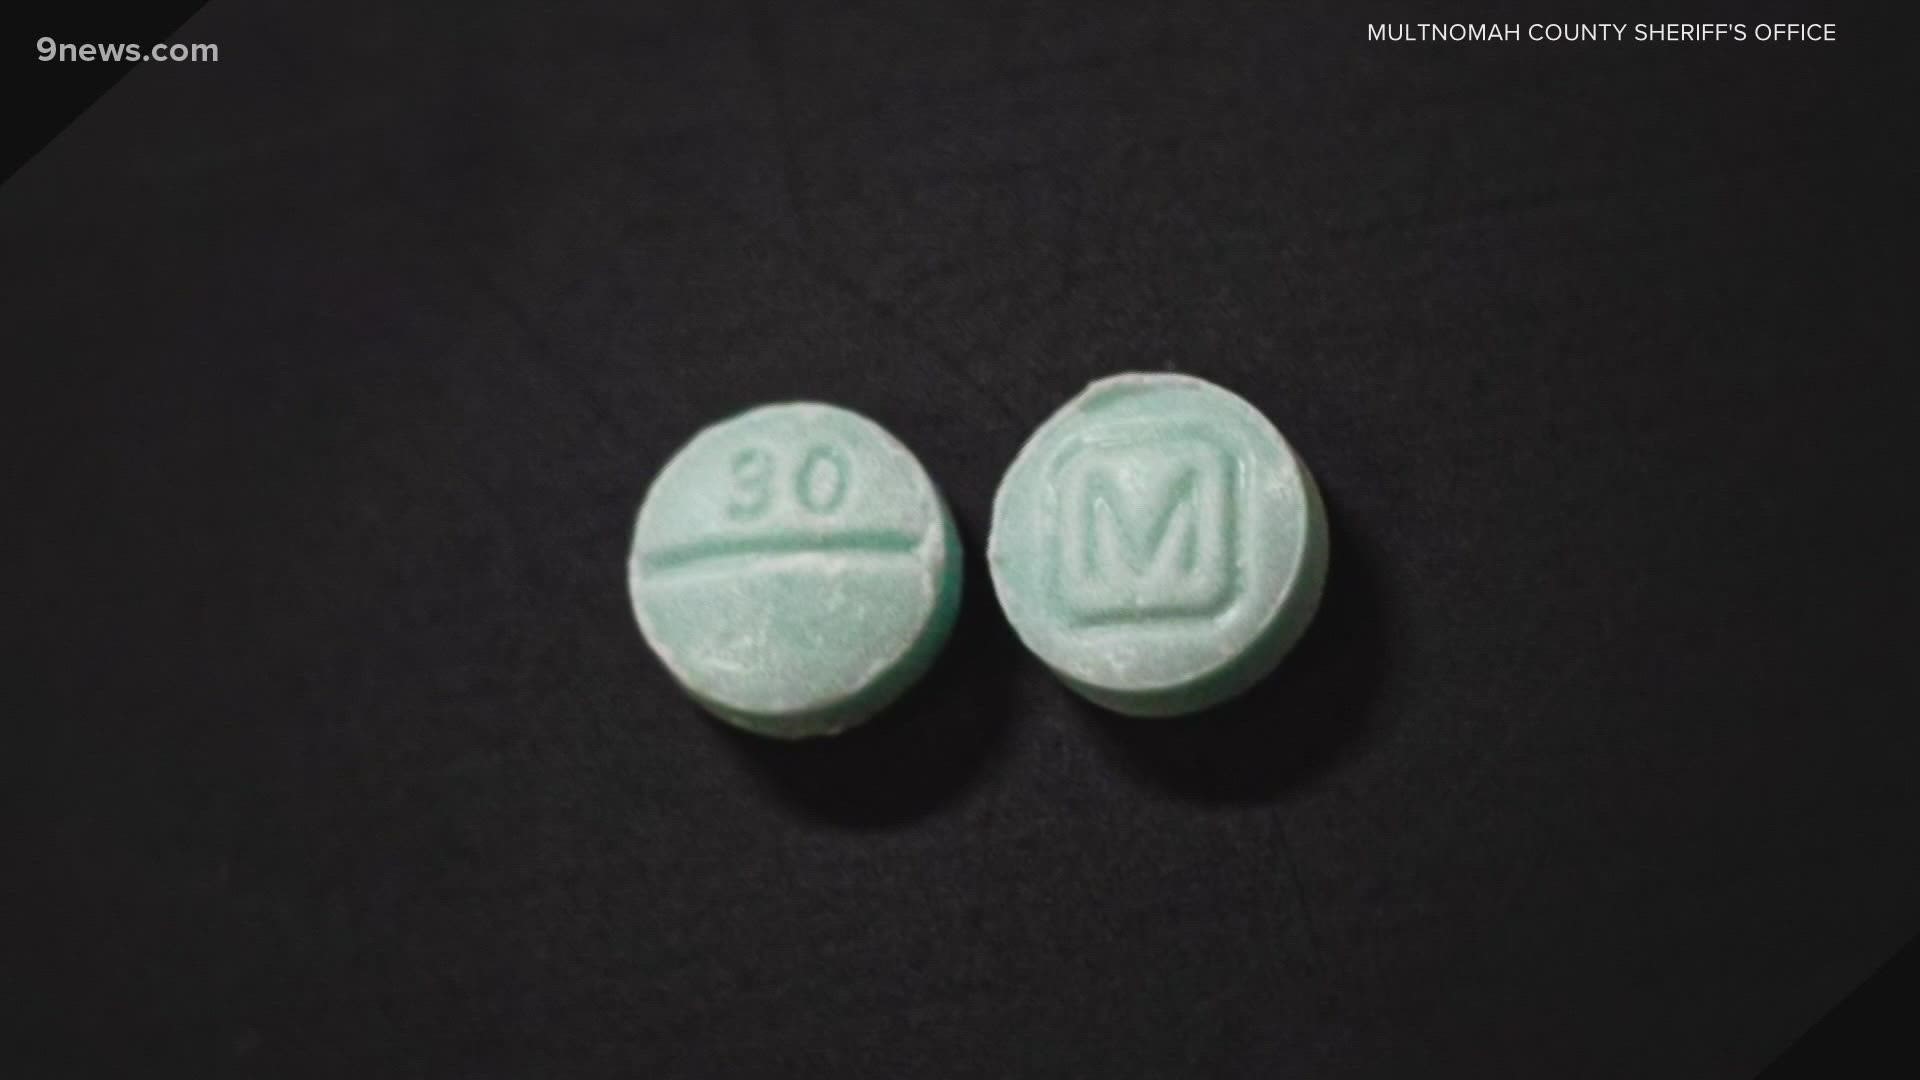 There's a bipartisan bill in the works to increase penalties for fentanyl dealers in Colorado.